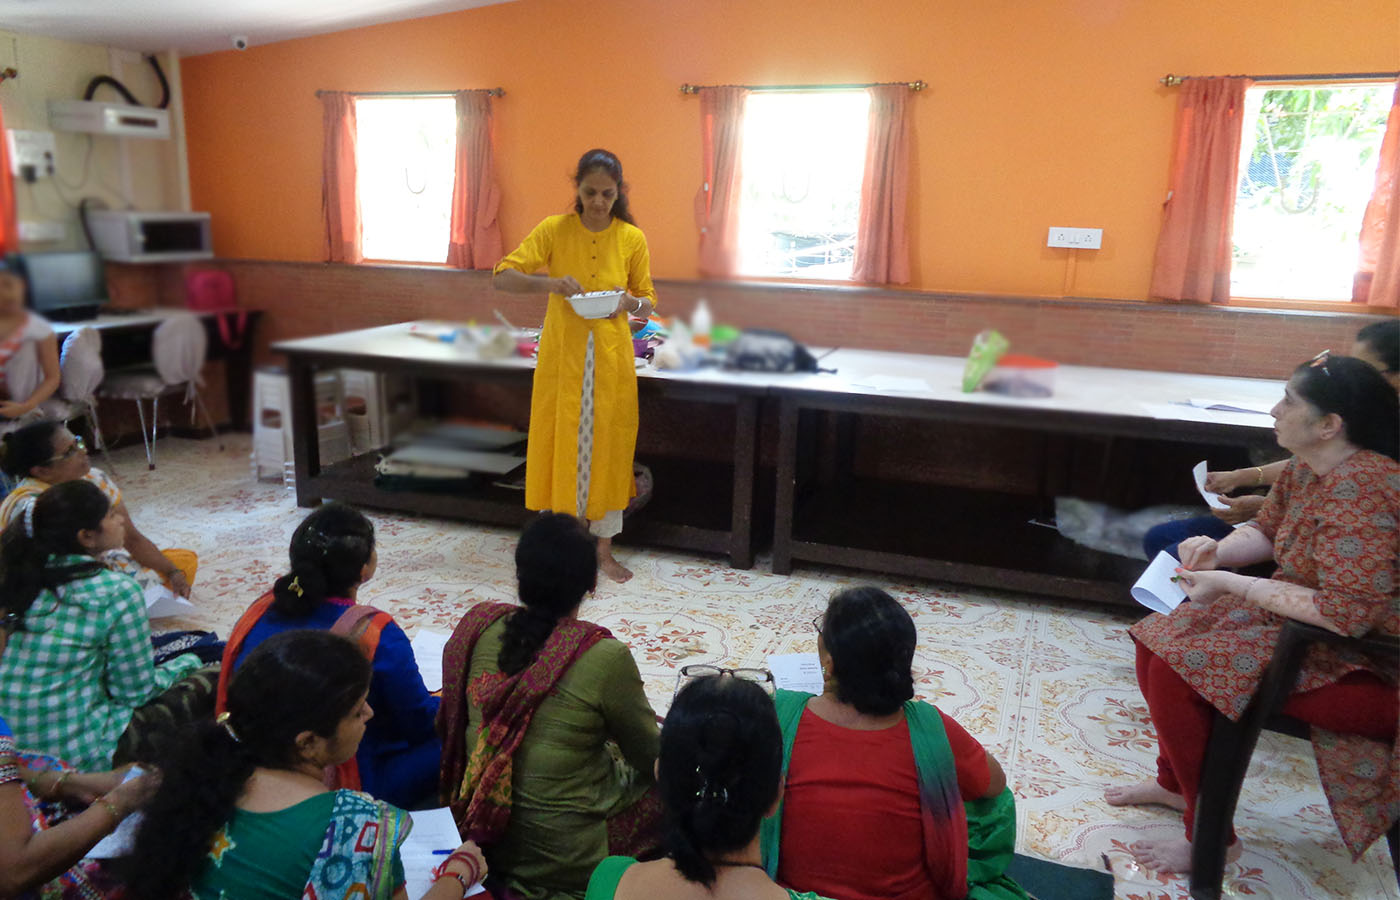 Mukhwas making session was organized for Women during Summer Workshop